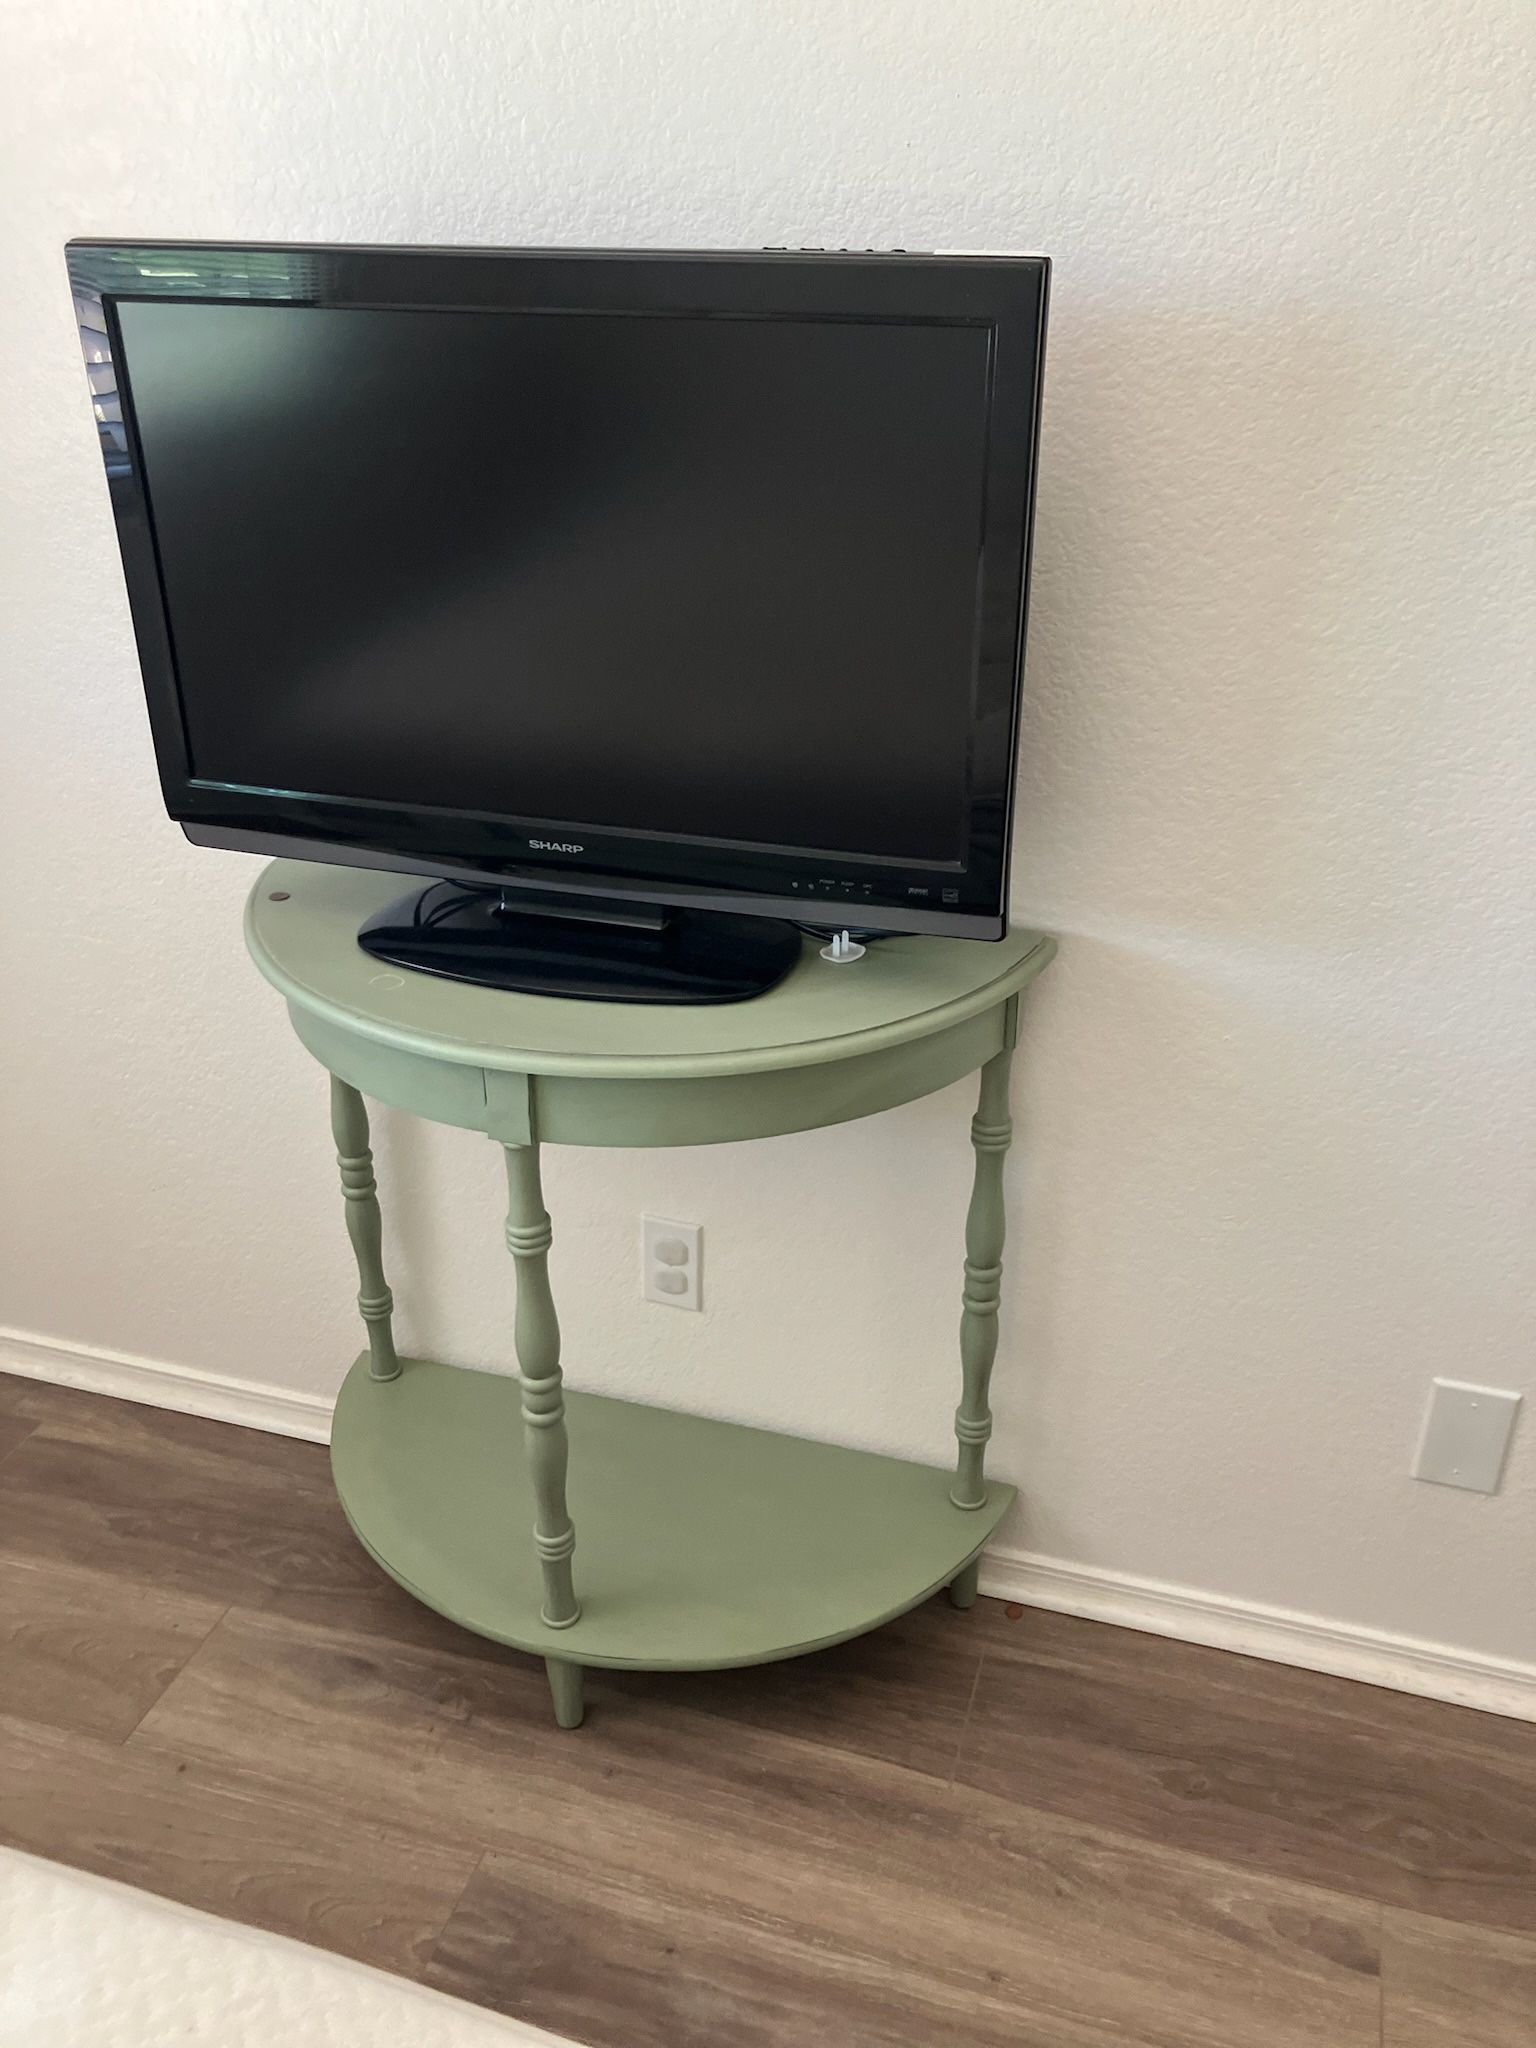 Tv With Remote & Olive Green Console Table / TV Stand / Sofa Table